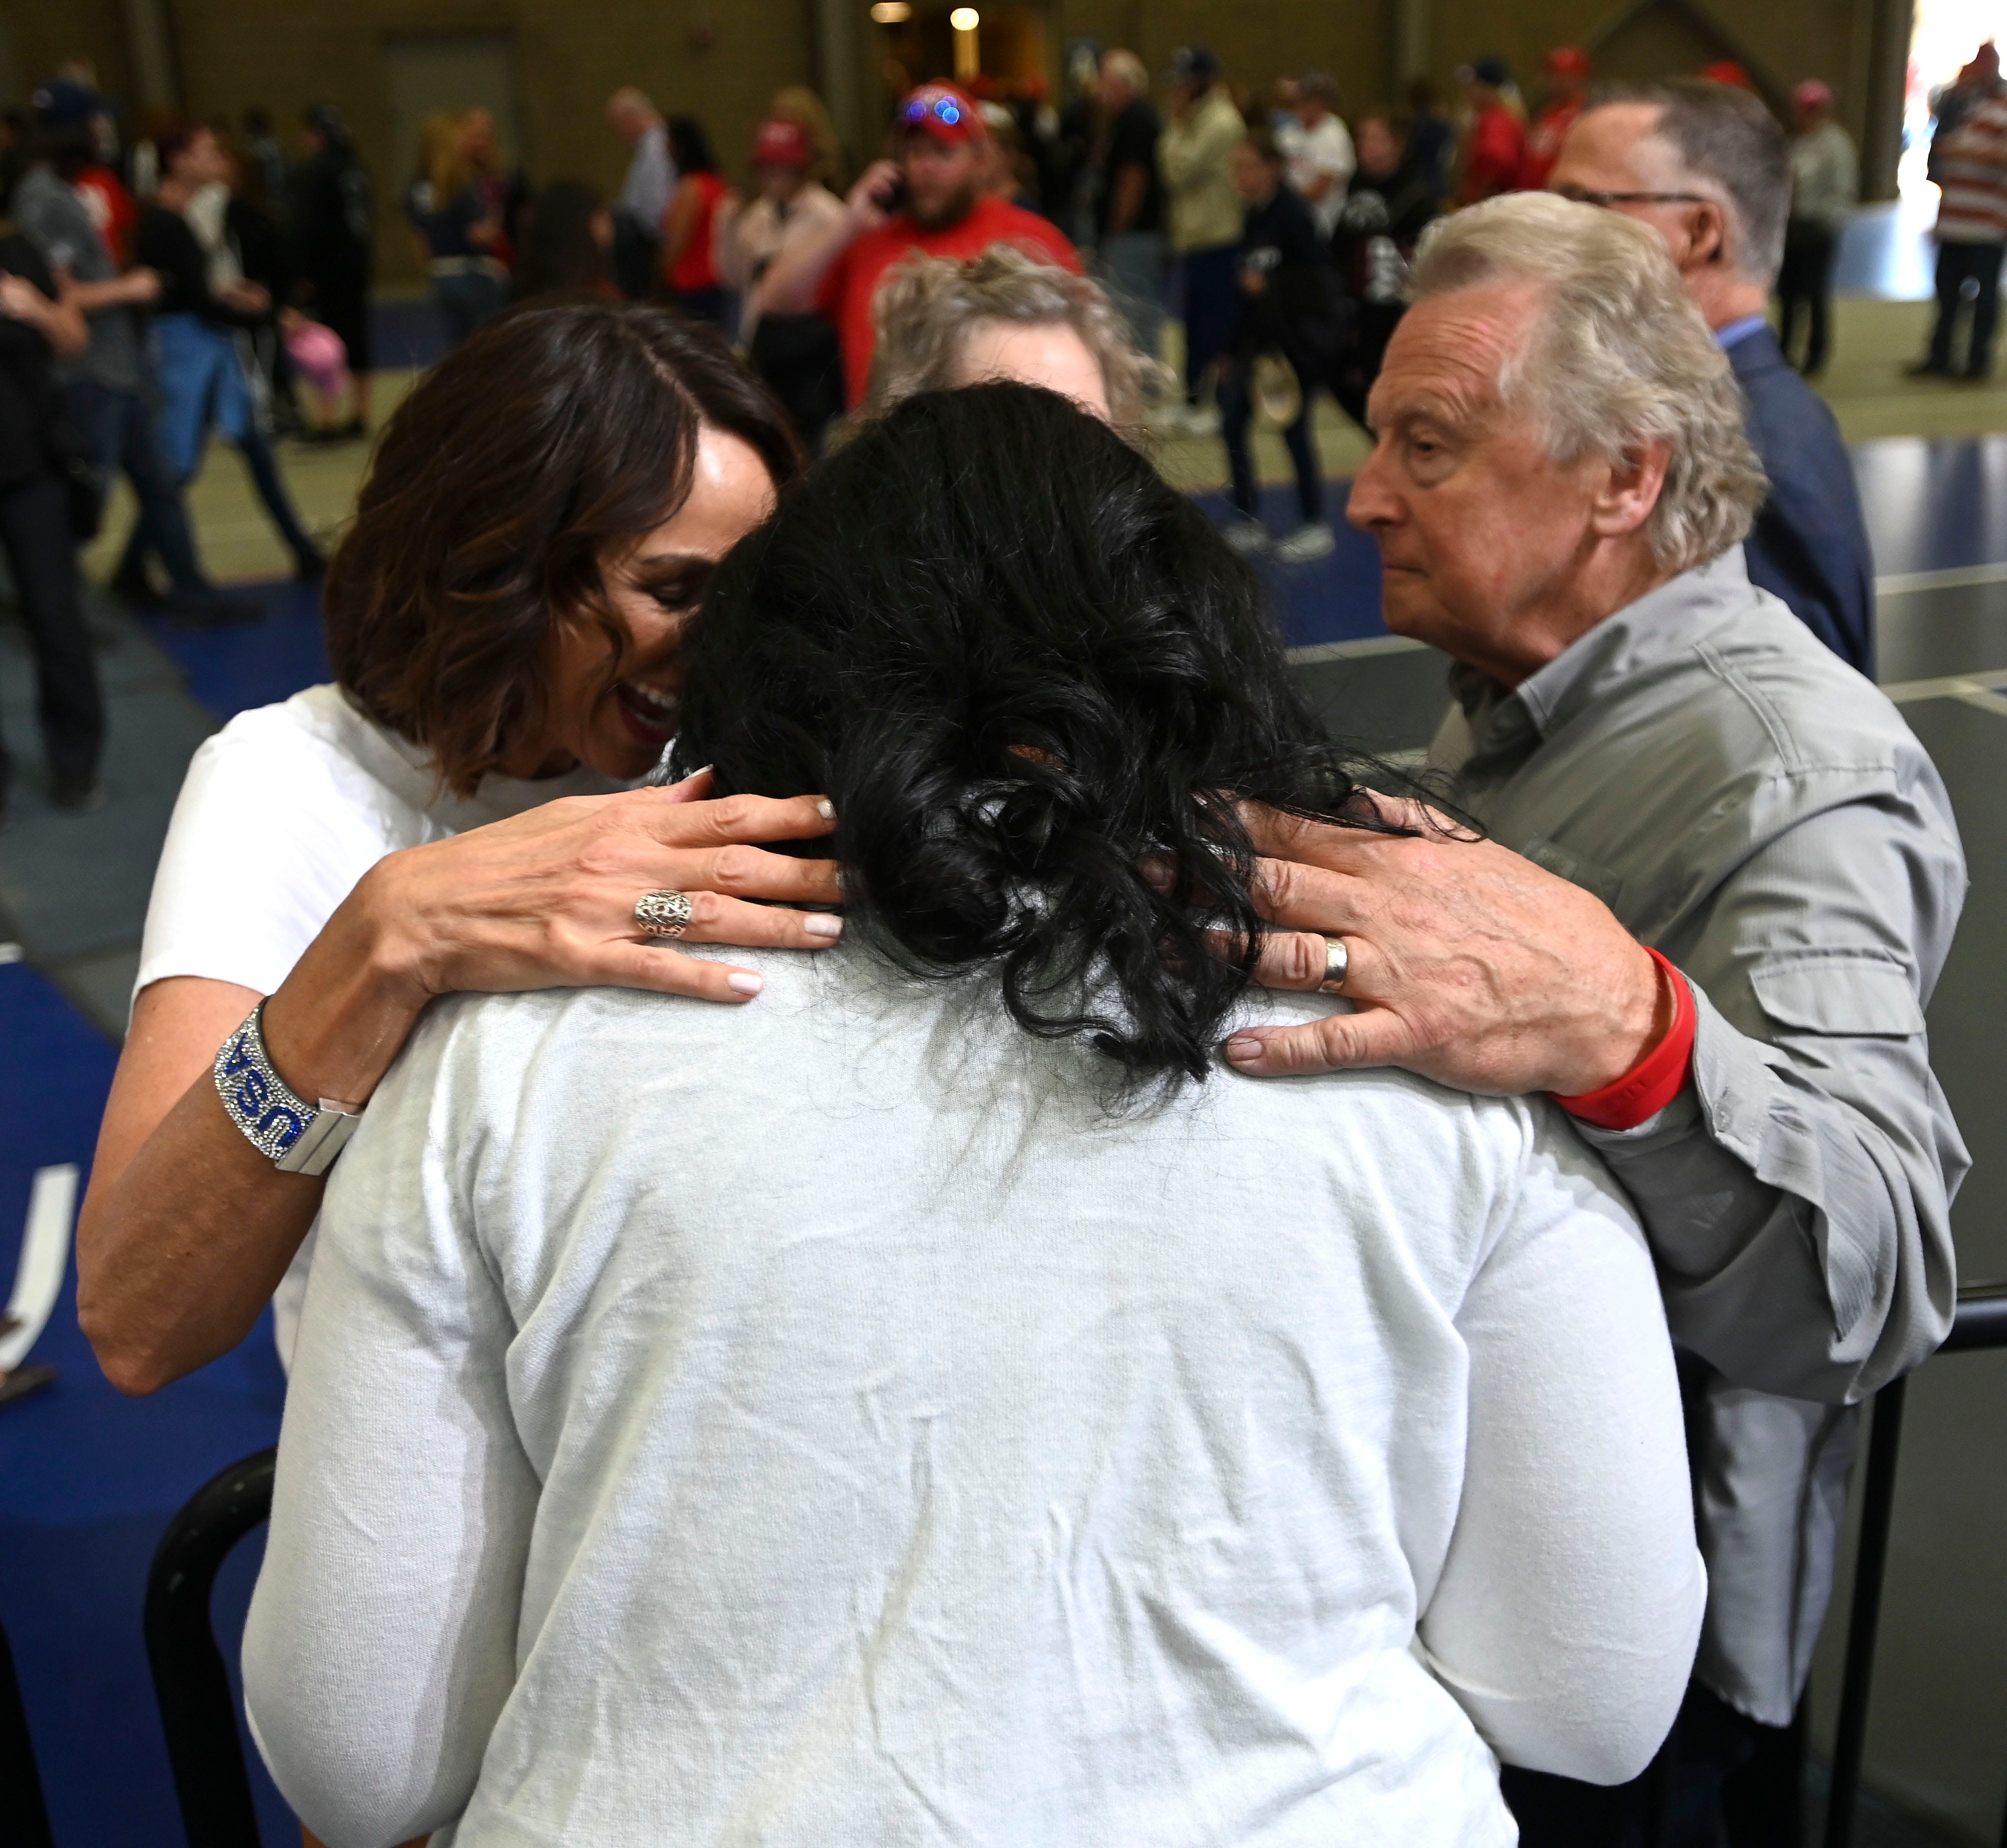 Lana Kristal, left, of Bingham Farms, volunteer prayer coordinator for the Kristina Karamo campaign and Rick Warzywak, right, director of Transformation Michigan and the Michigan Capitol House of Prayer, pray for Kristina Karamo, center, candidate for secretary of state, at a Donald Trump rally in Warren, Saturday, October 1, 2022.